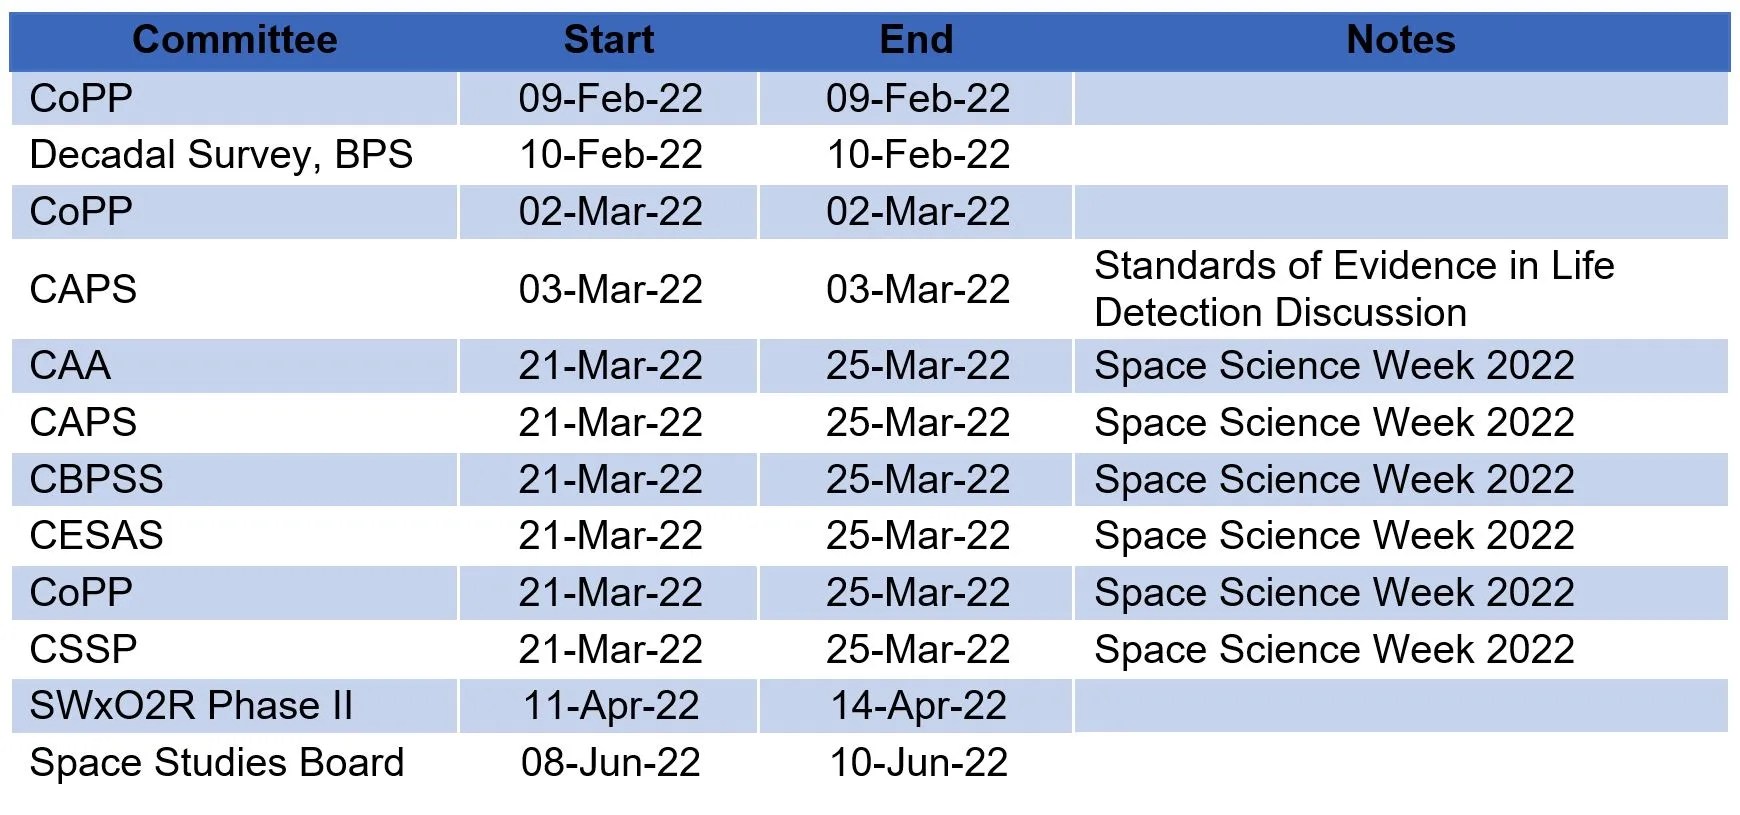 Table of start-end dates, committees, and notes for Space Science Week at the National Academies (March 21-25, 2022).